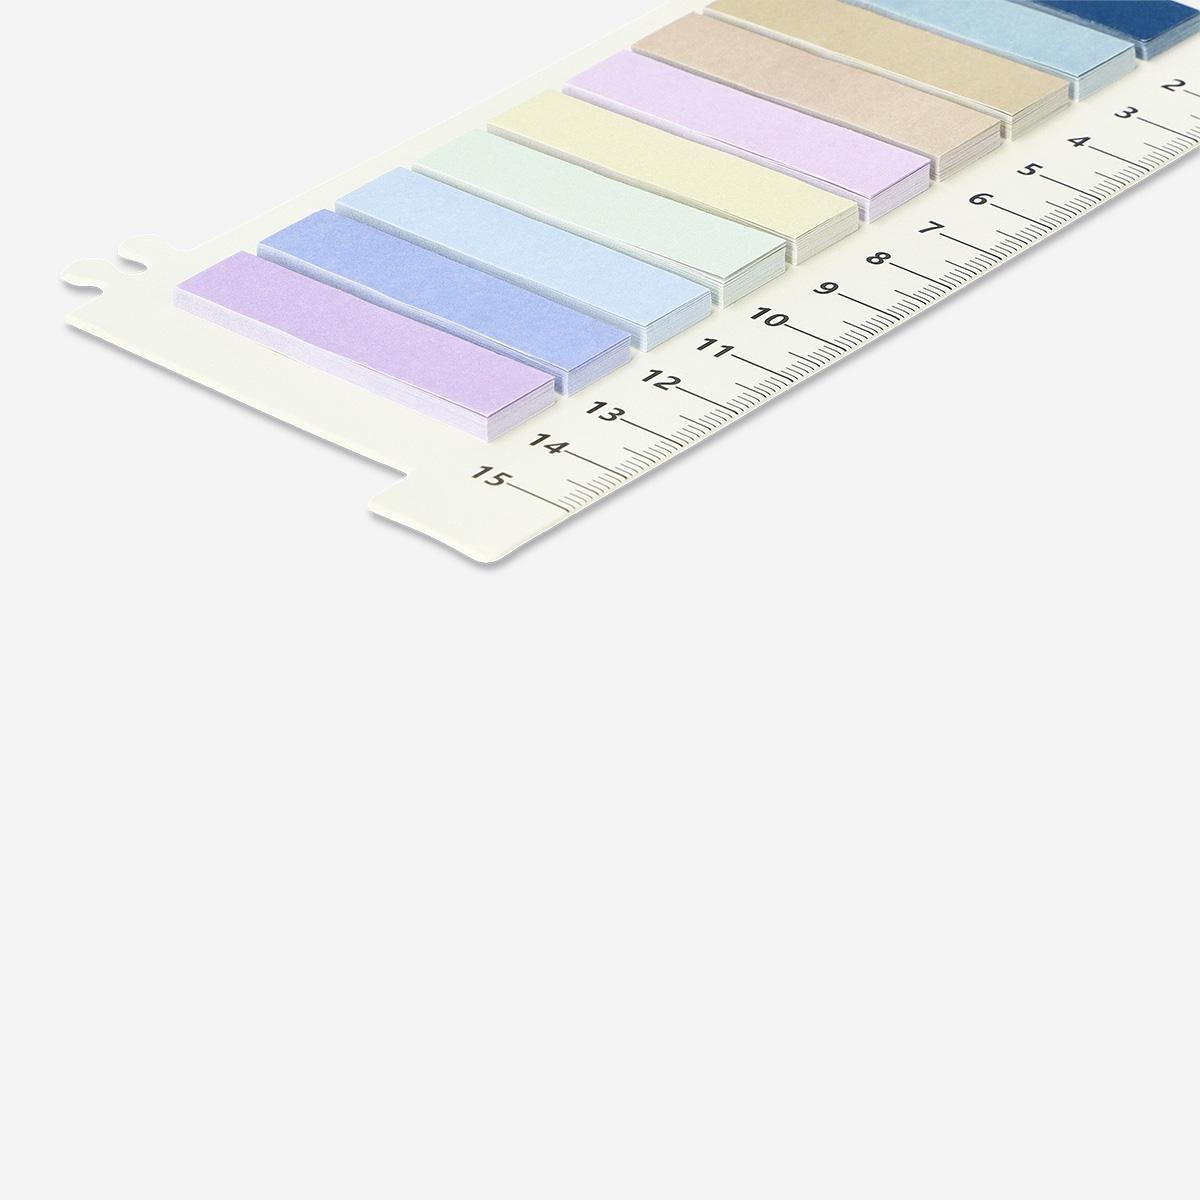 Page markers on ruler